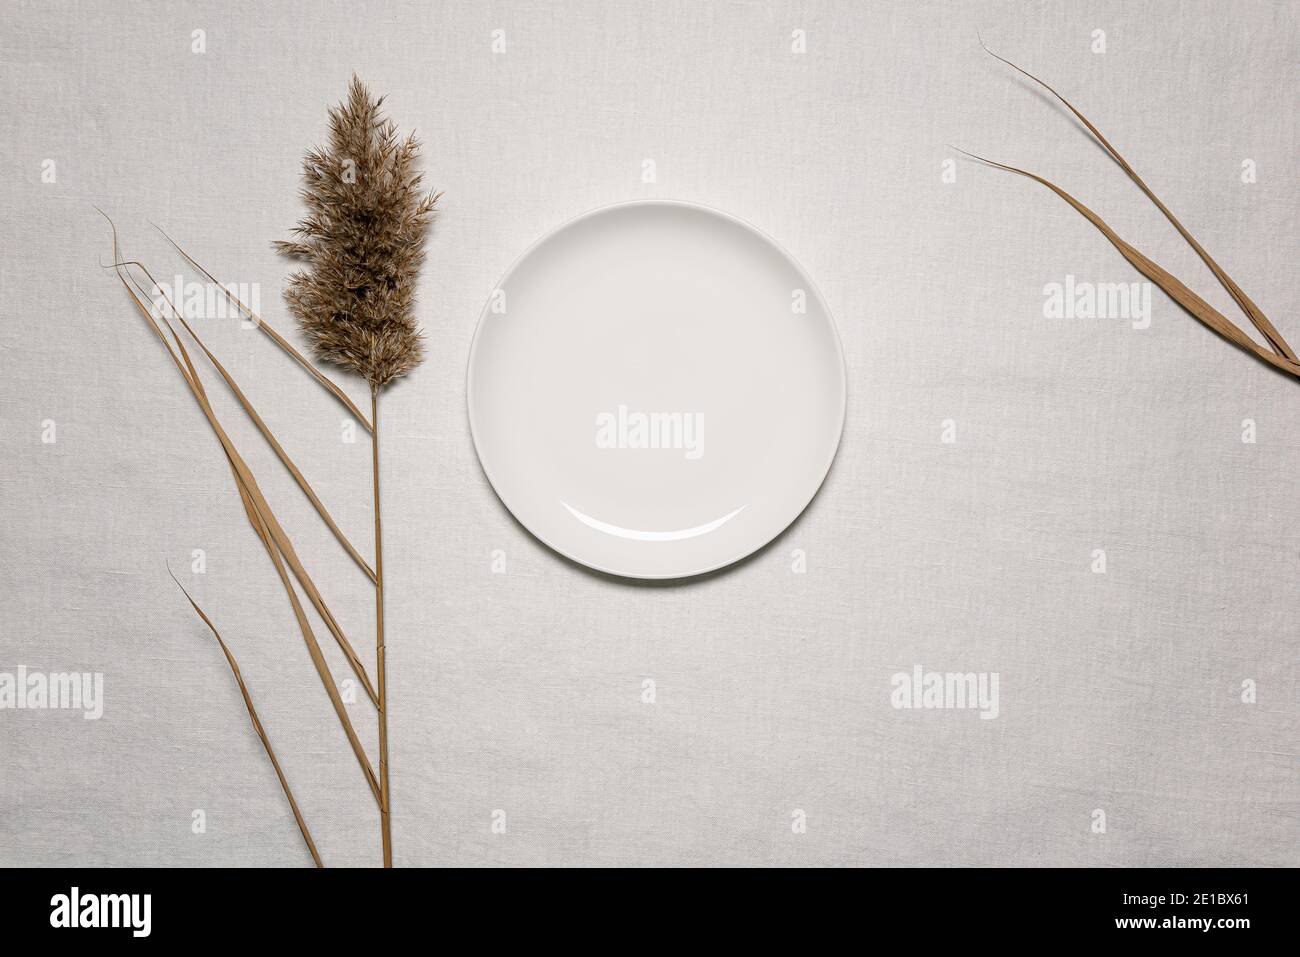 Natural dried reed flower, leaves and empty white plate on textured white linen material. Flat lay background with dried flower arrangement and copy s Stock Photo